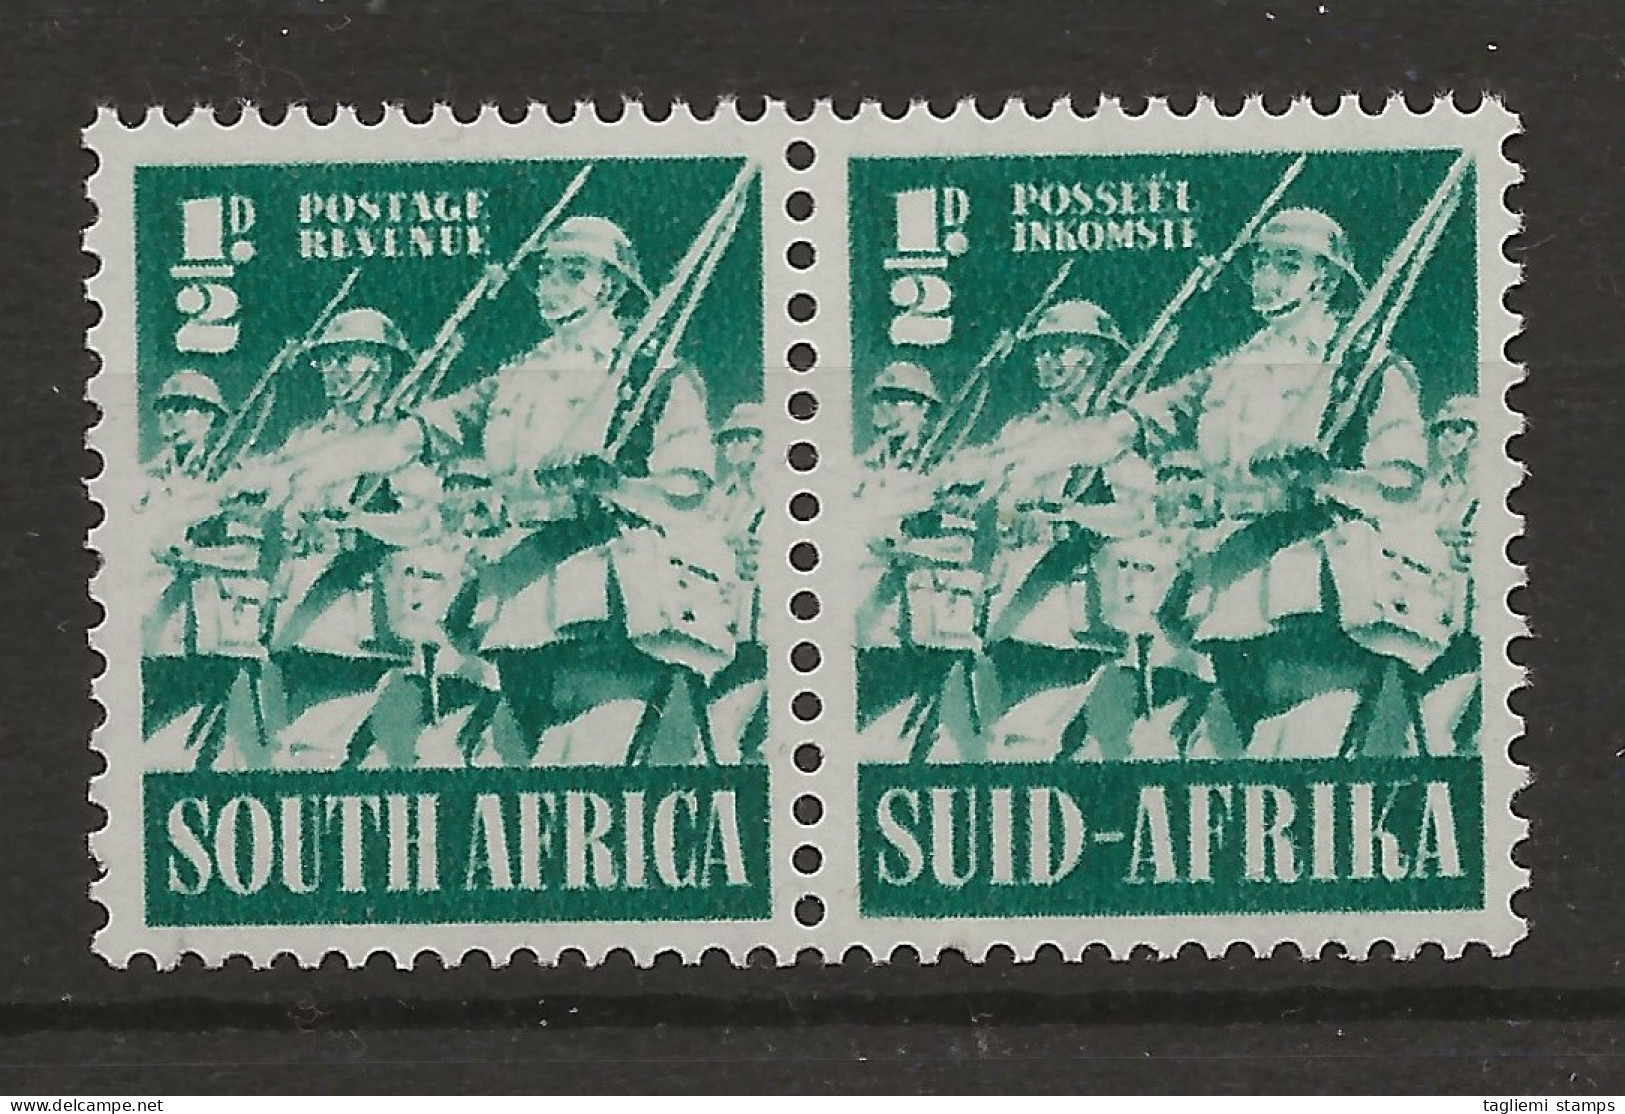 South Africa, 1941, SG  88, Pair, MNH - Unused Stamps